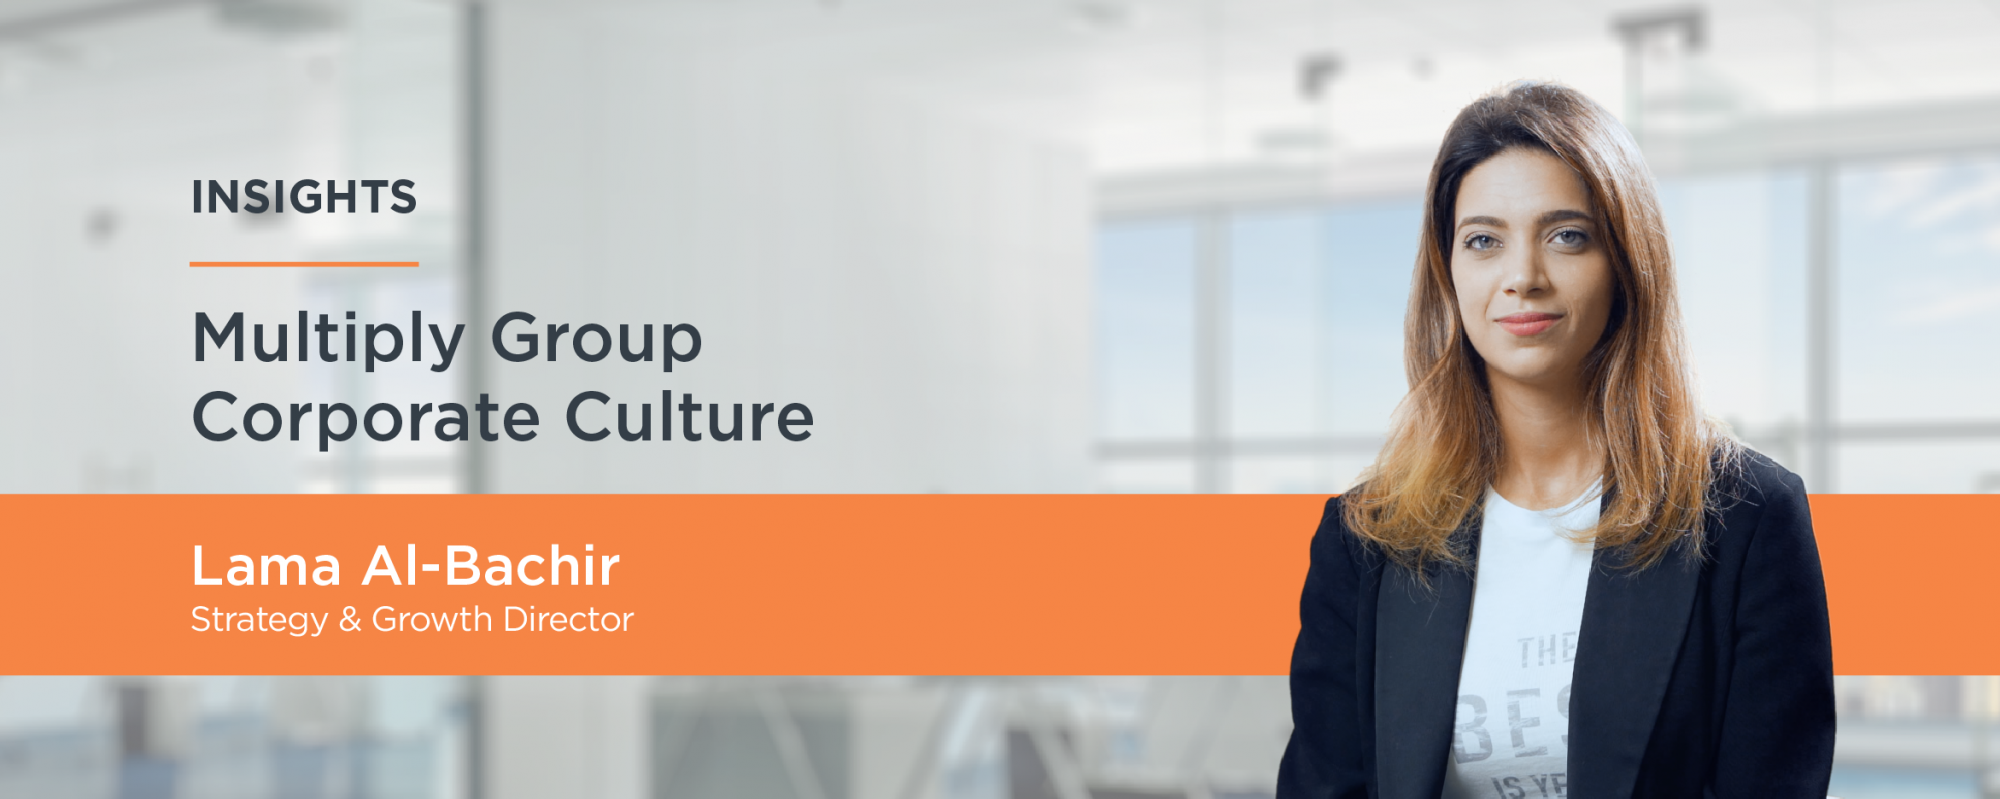 Multiply Group Corporate Culture